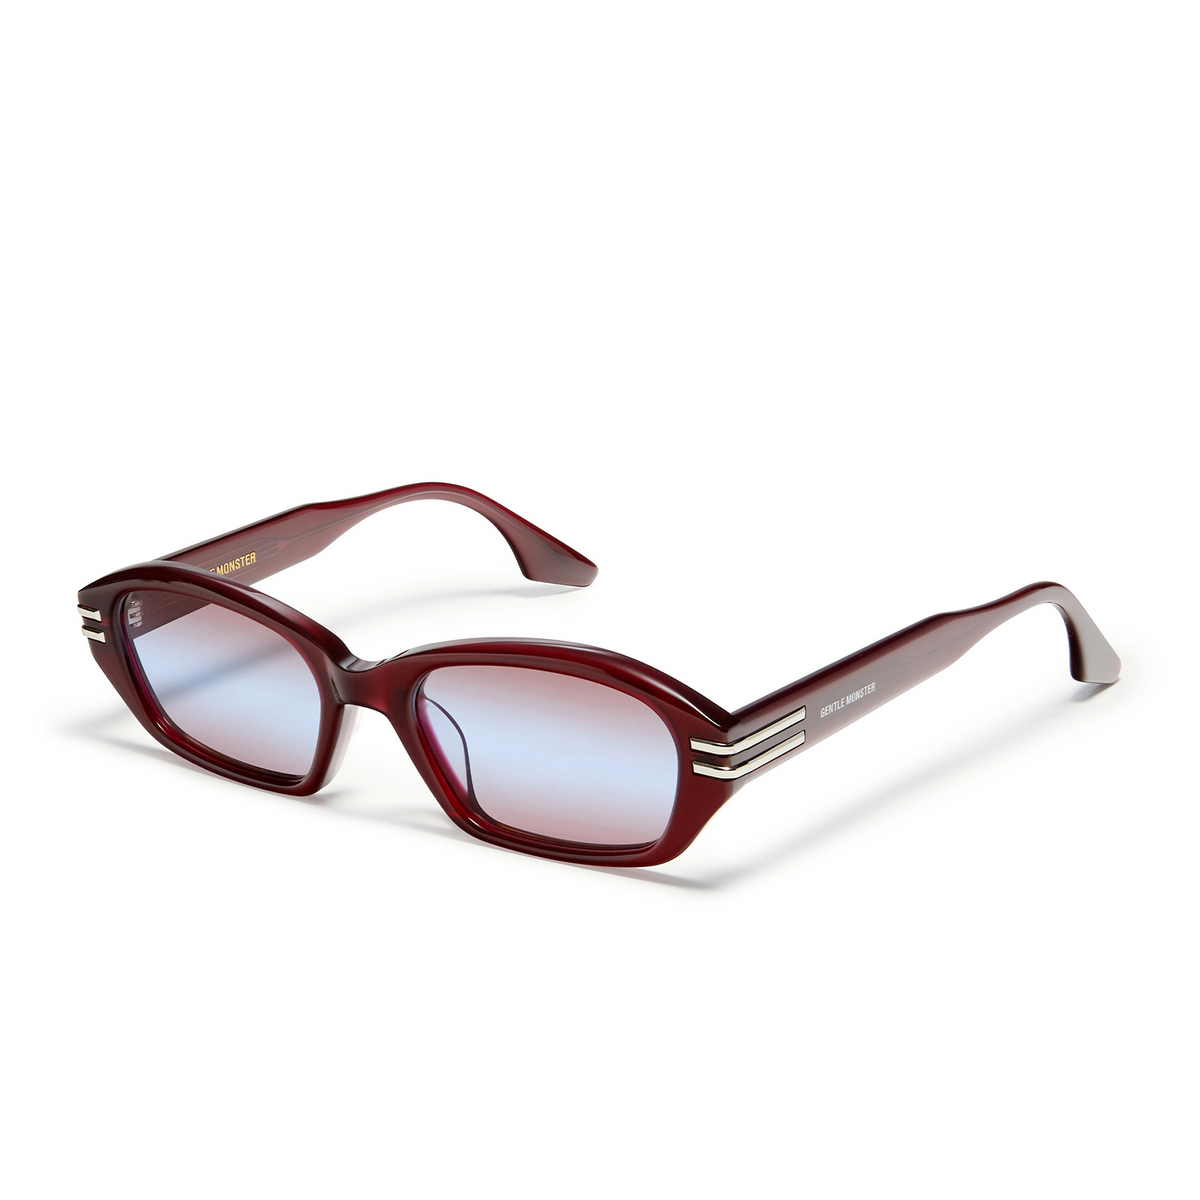 Gentle Monster® Irregular Sunglasses: Deck color Red RC3 - three-quarters view.